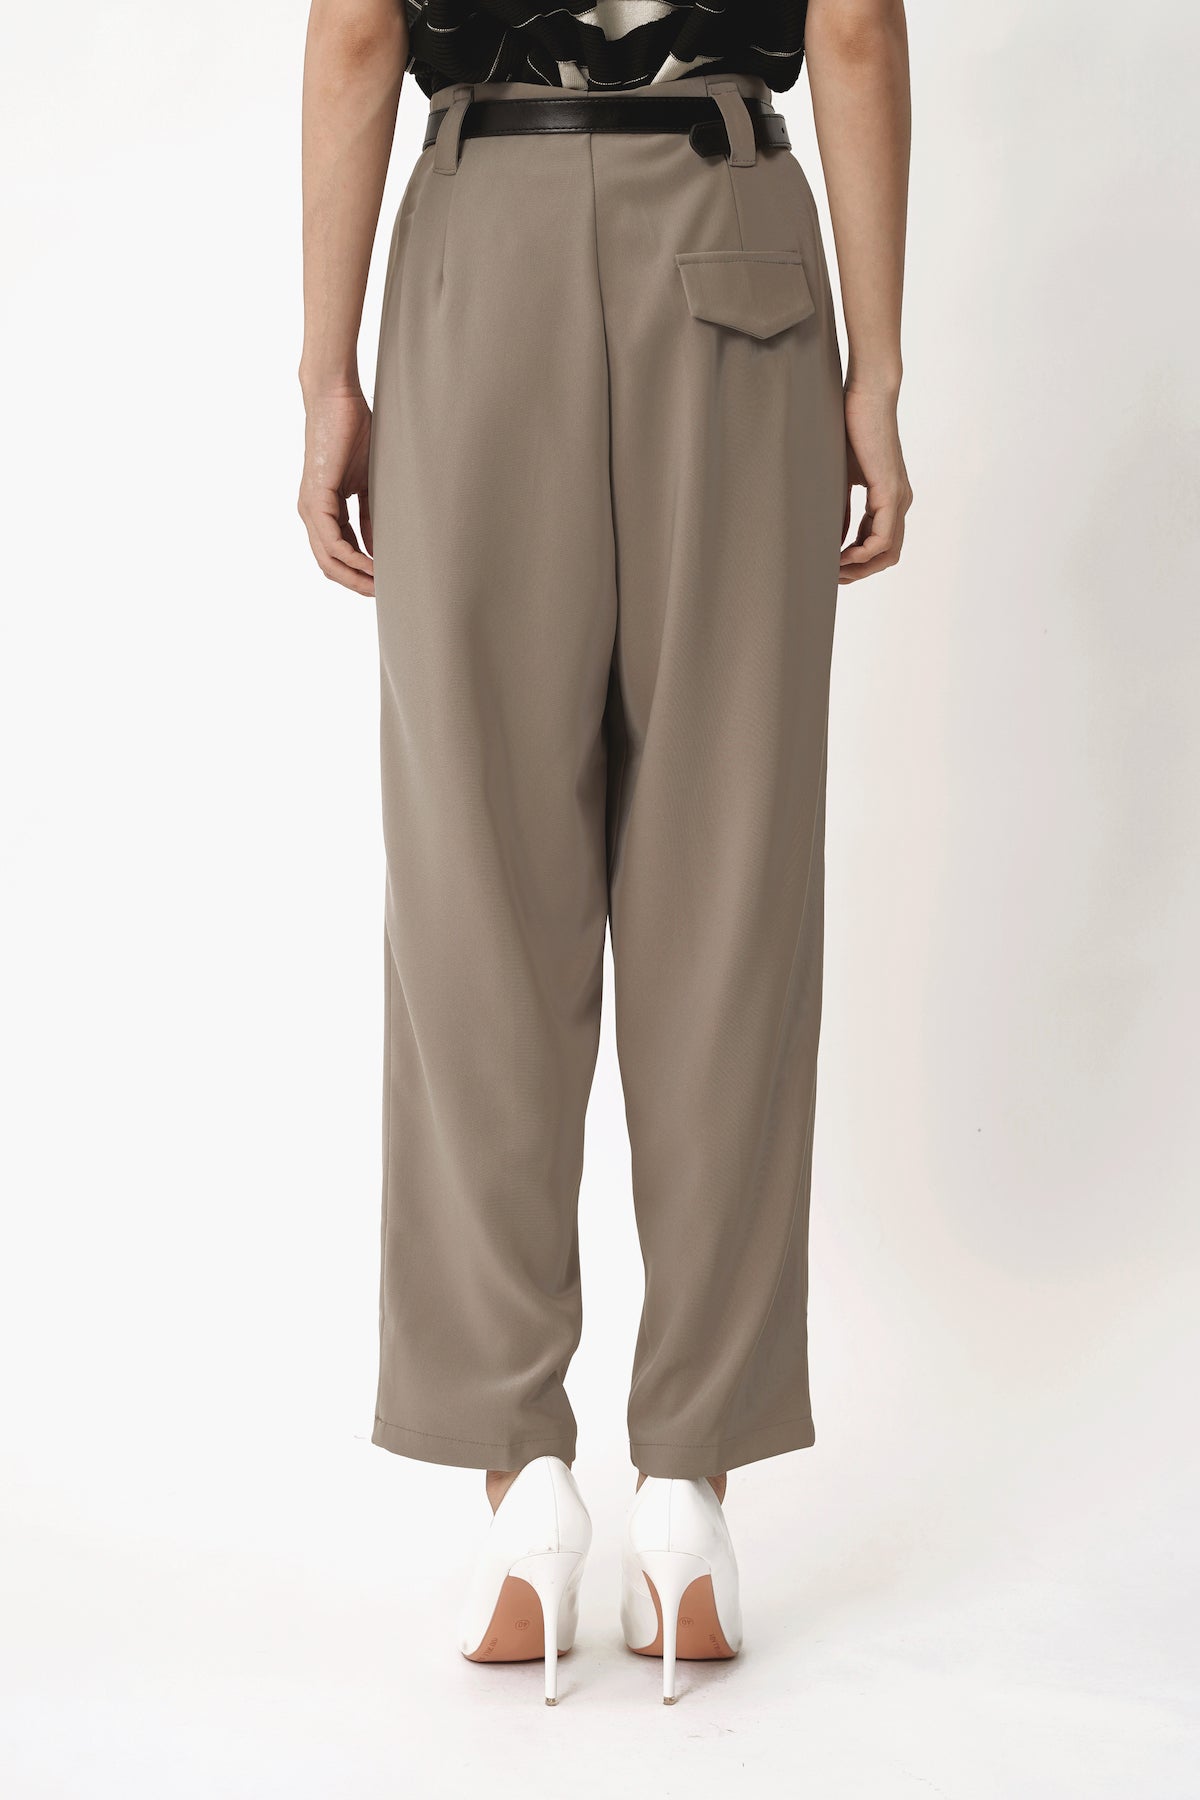 Lewis Pants In Taupe